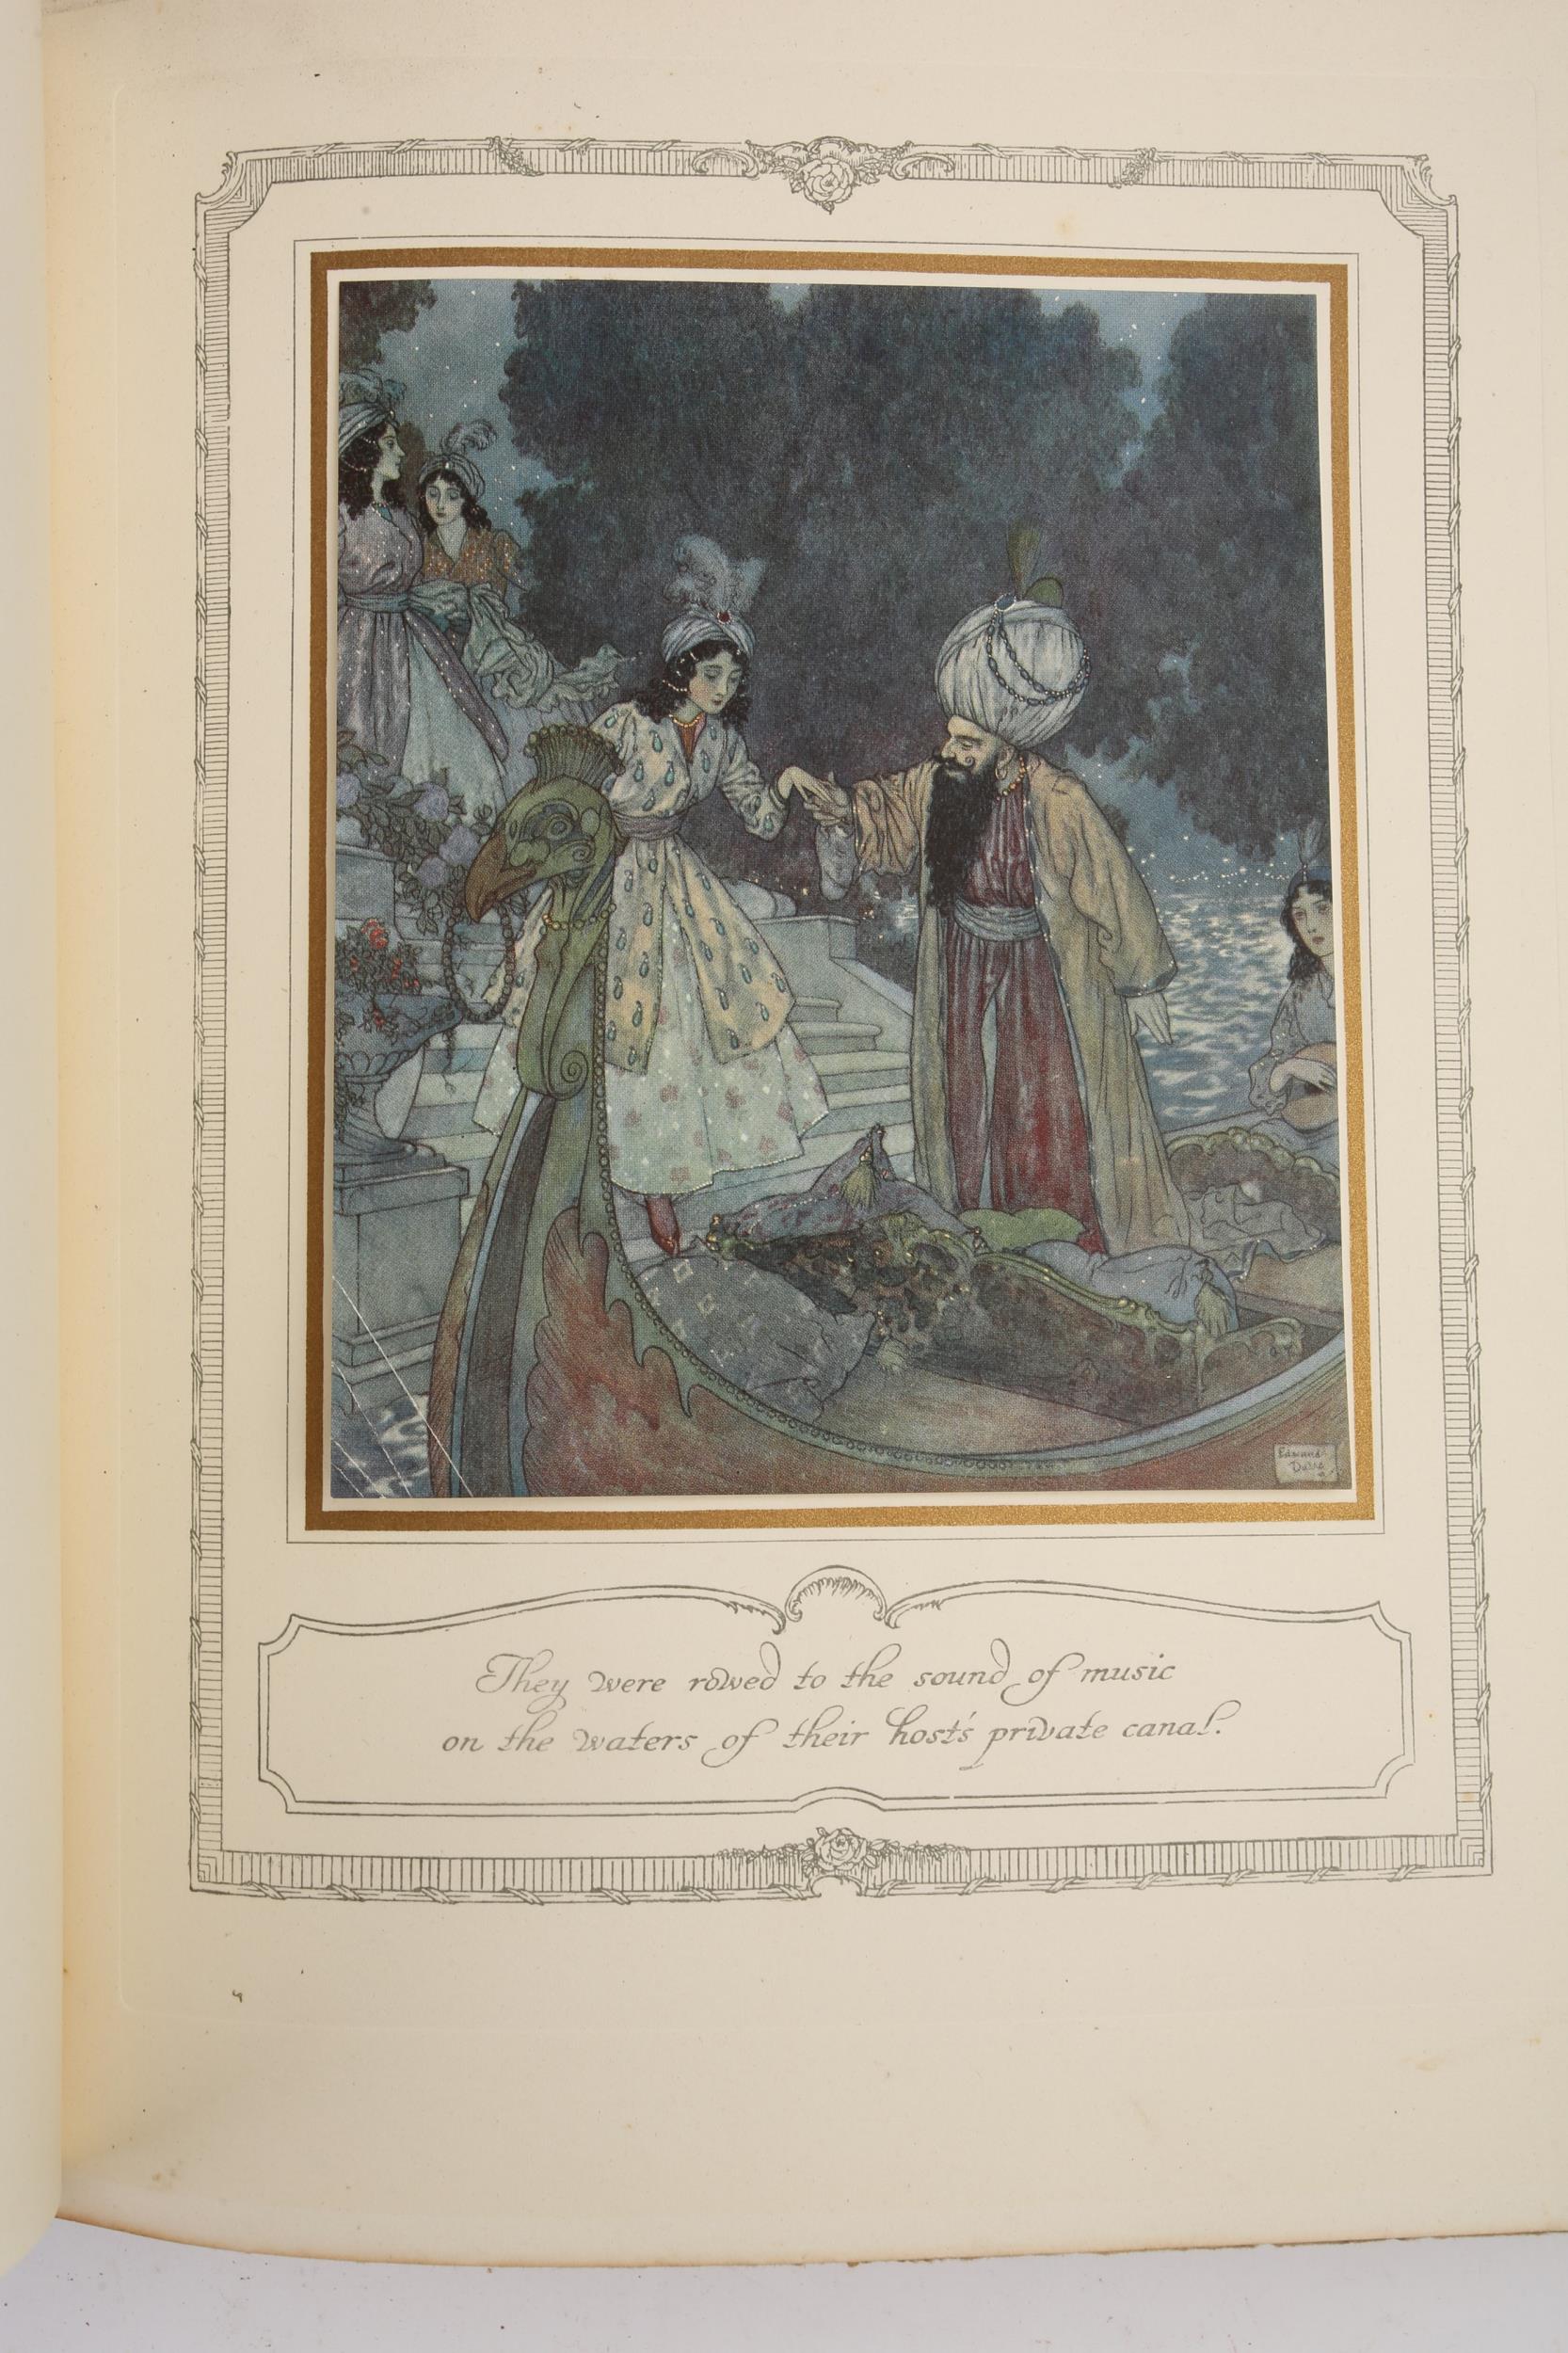 Arthur Quiller-Couch, 'The Sleeping Beauty and Other Fairy Tales', London, Hodder & Stoughton, - Image 10 of 21